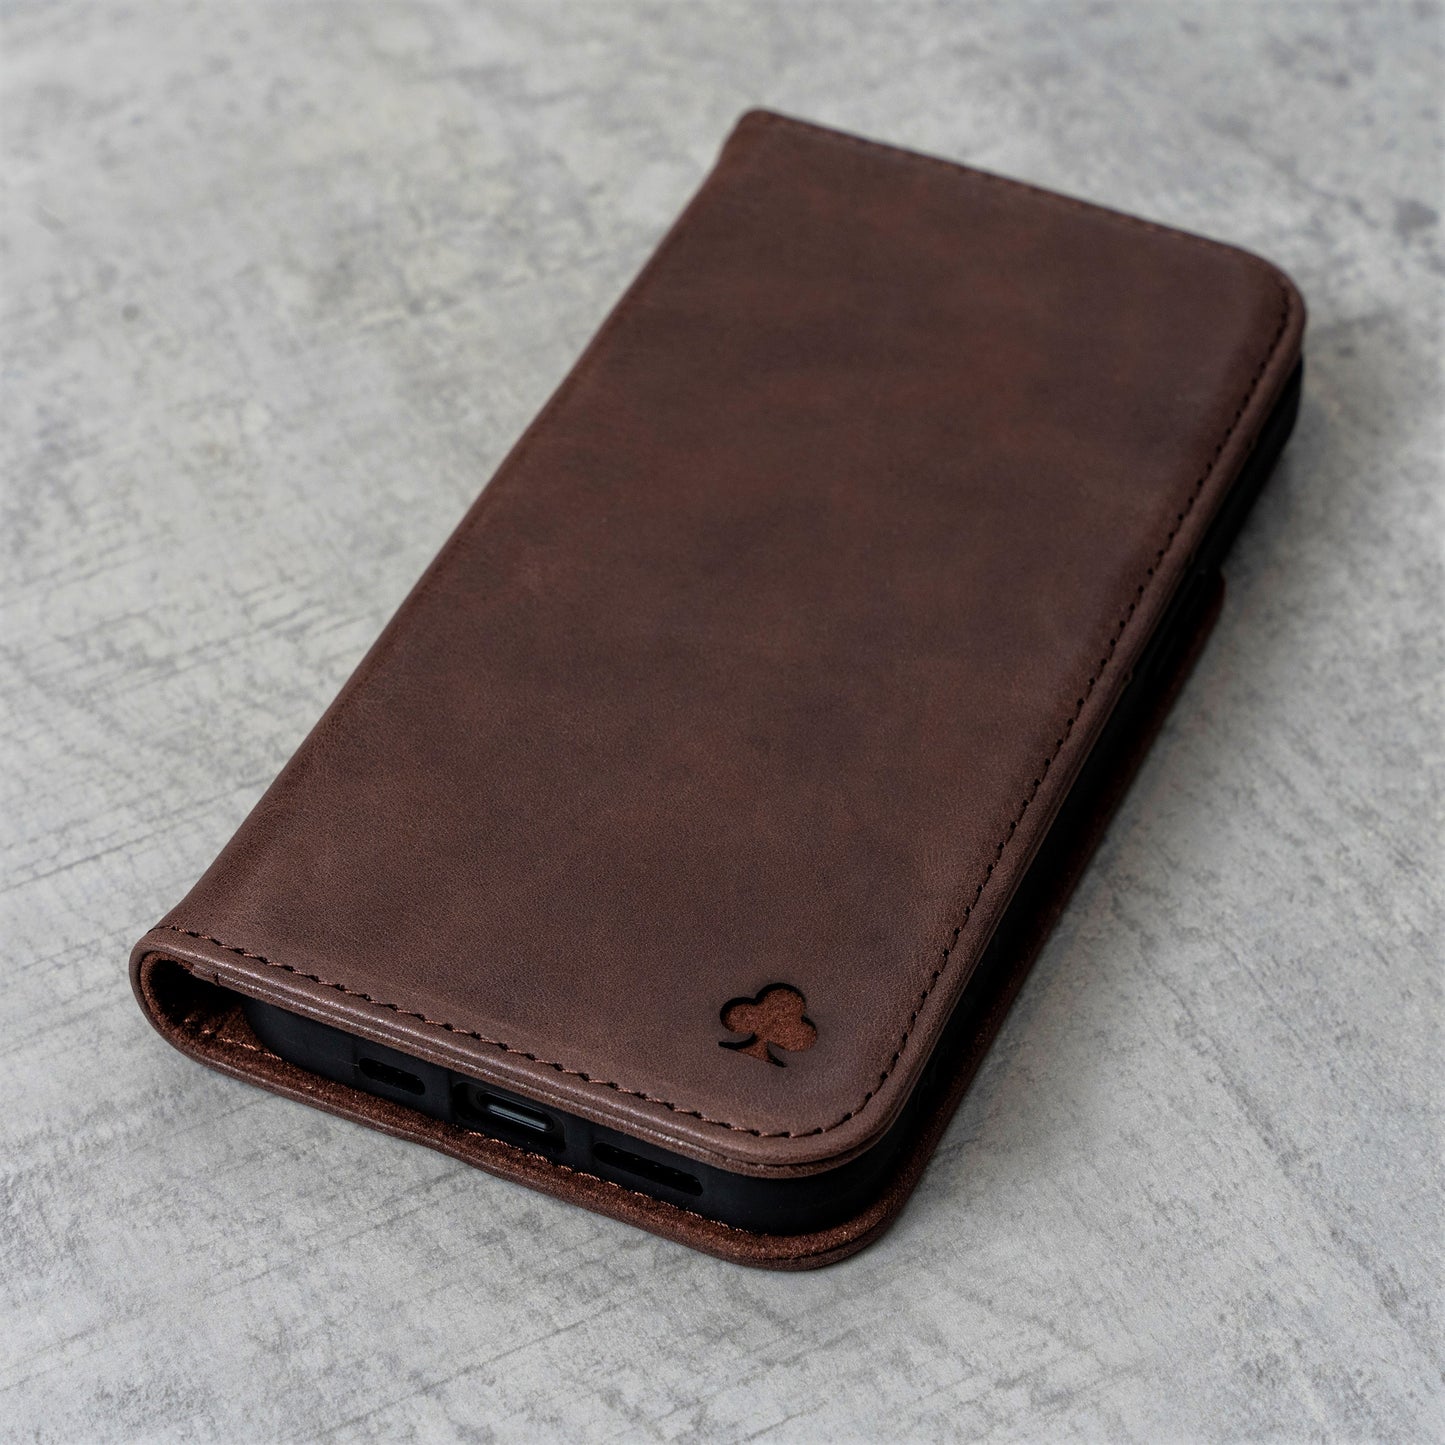 iPhone XR Leather Case. Premium Slim Genuine Leather Stand Case/Cover/Wallet (Chocolate Brown)